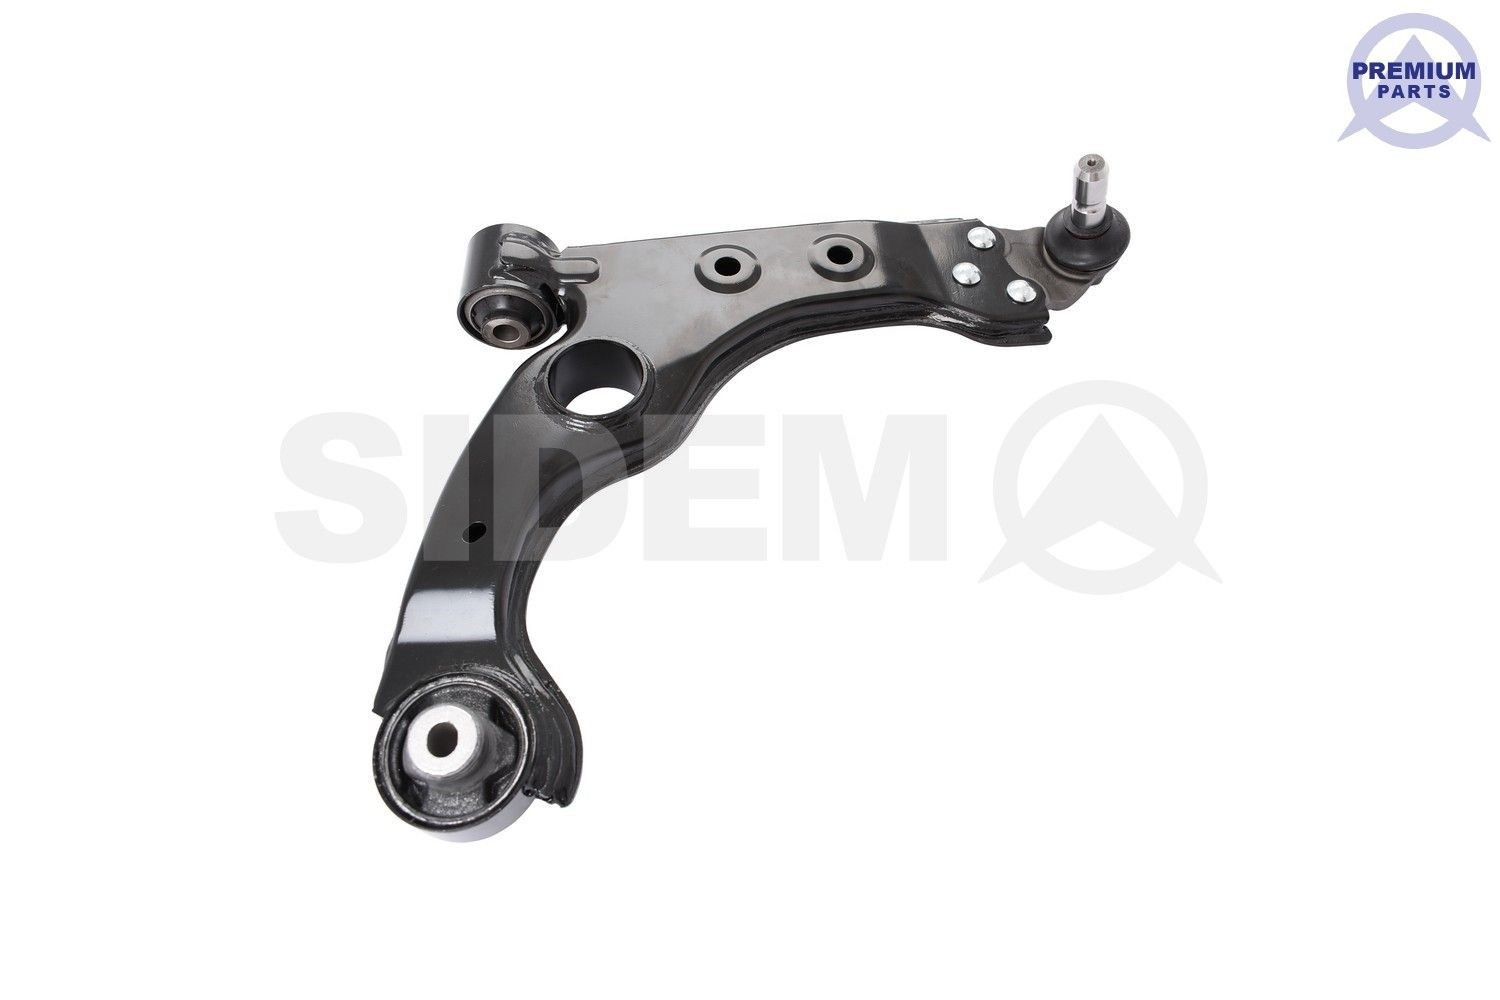 35073 SIDEM Control arm ALFA ROMEO Lower, Front Axle Right, Control Arm, Sheet Steel, Cone Size: 19 mm, Push Rod